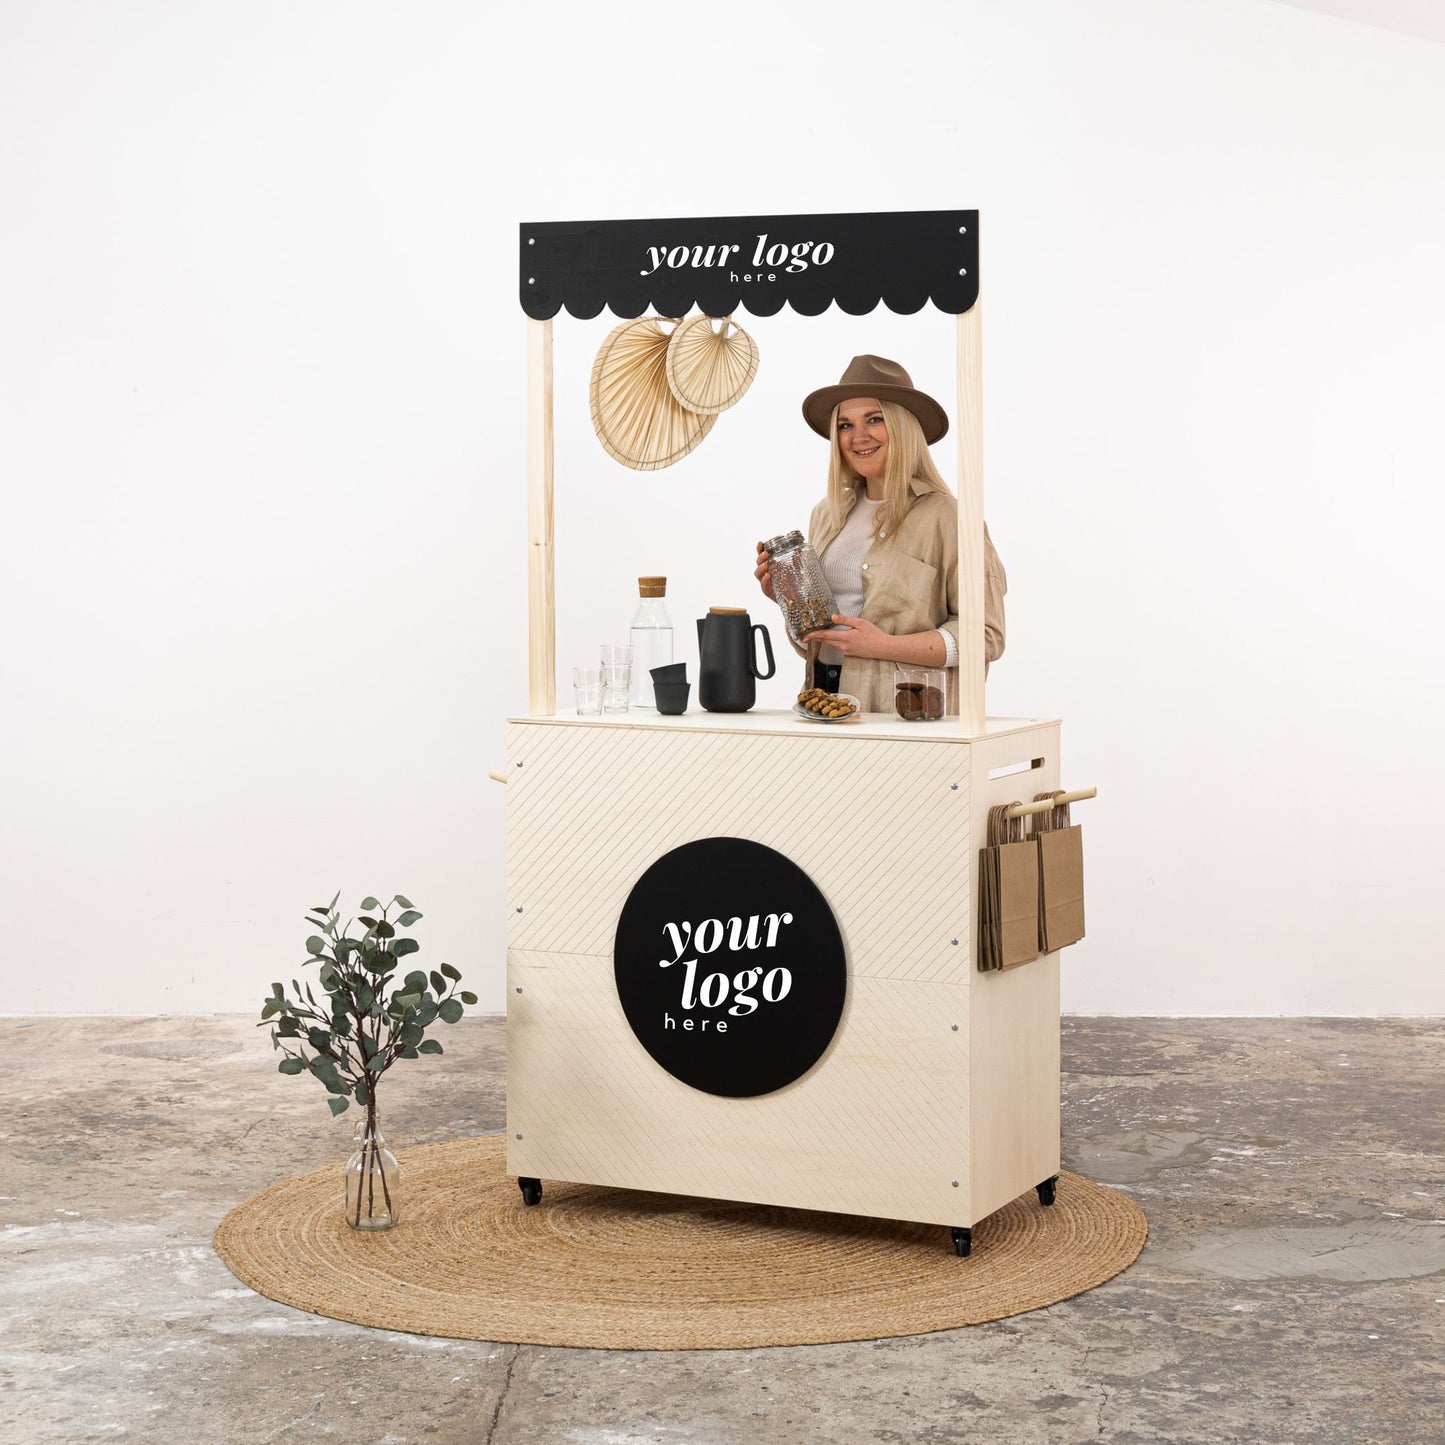 Display kiosk VC-16-W | tasting station | collapsible portable vendor display with storage | Milimetry